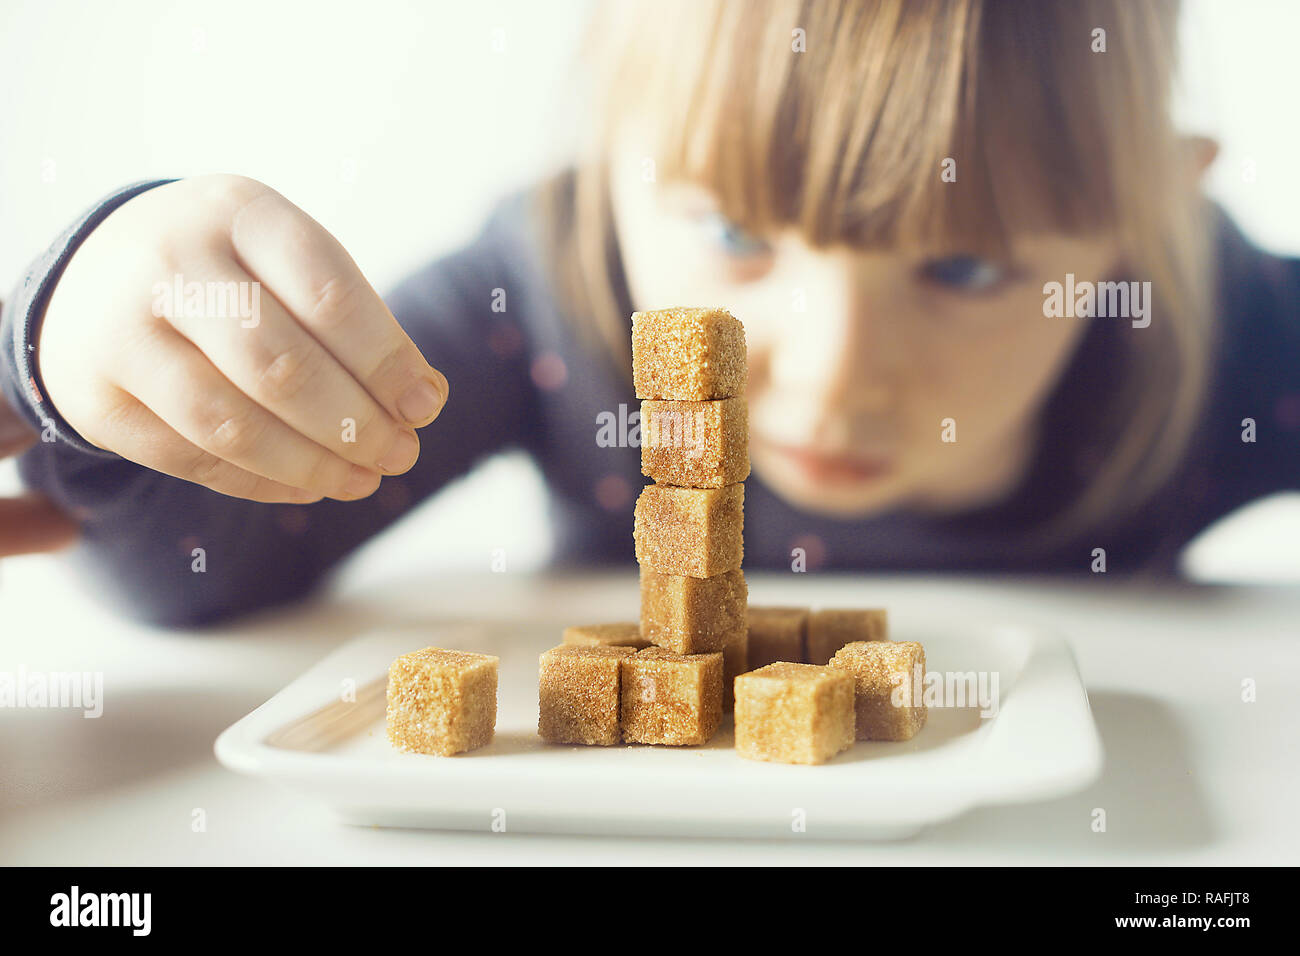 Child, sugar cubes. The problem of excessive consumption of sugar by children under the age of 10 years. Stock Photo